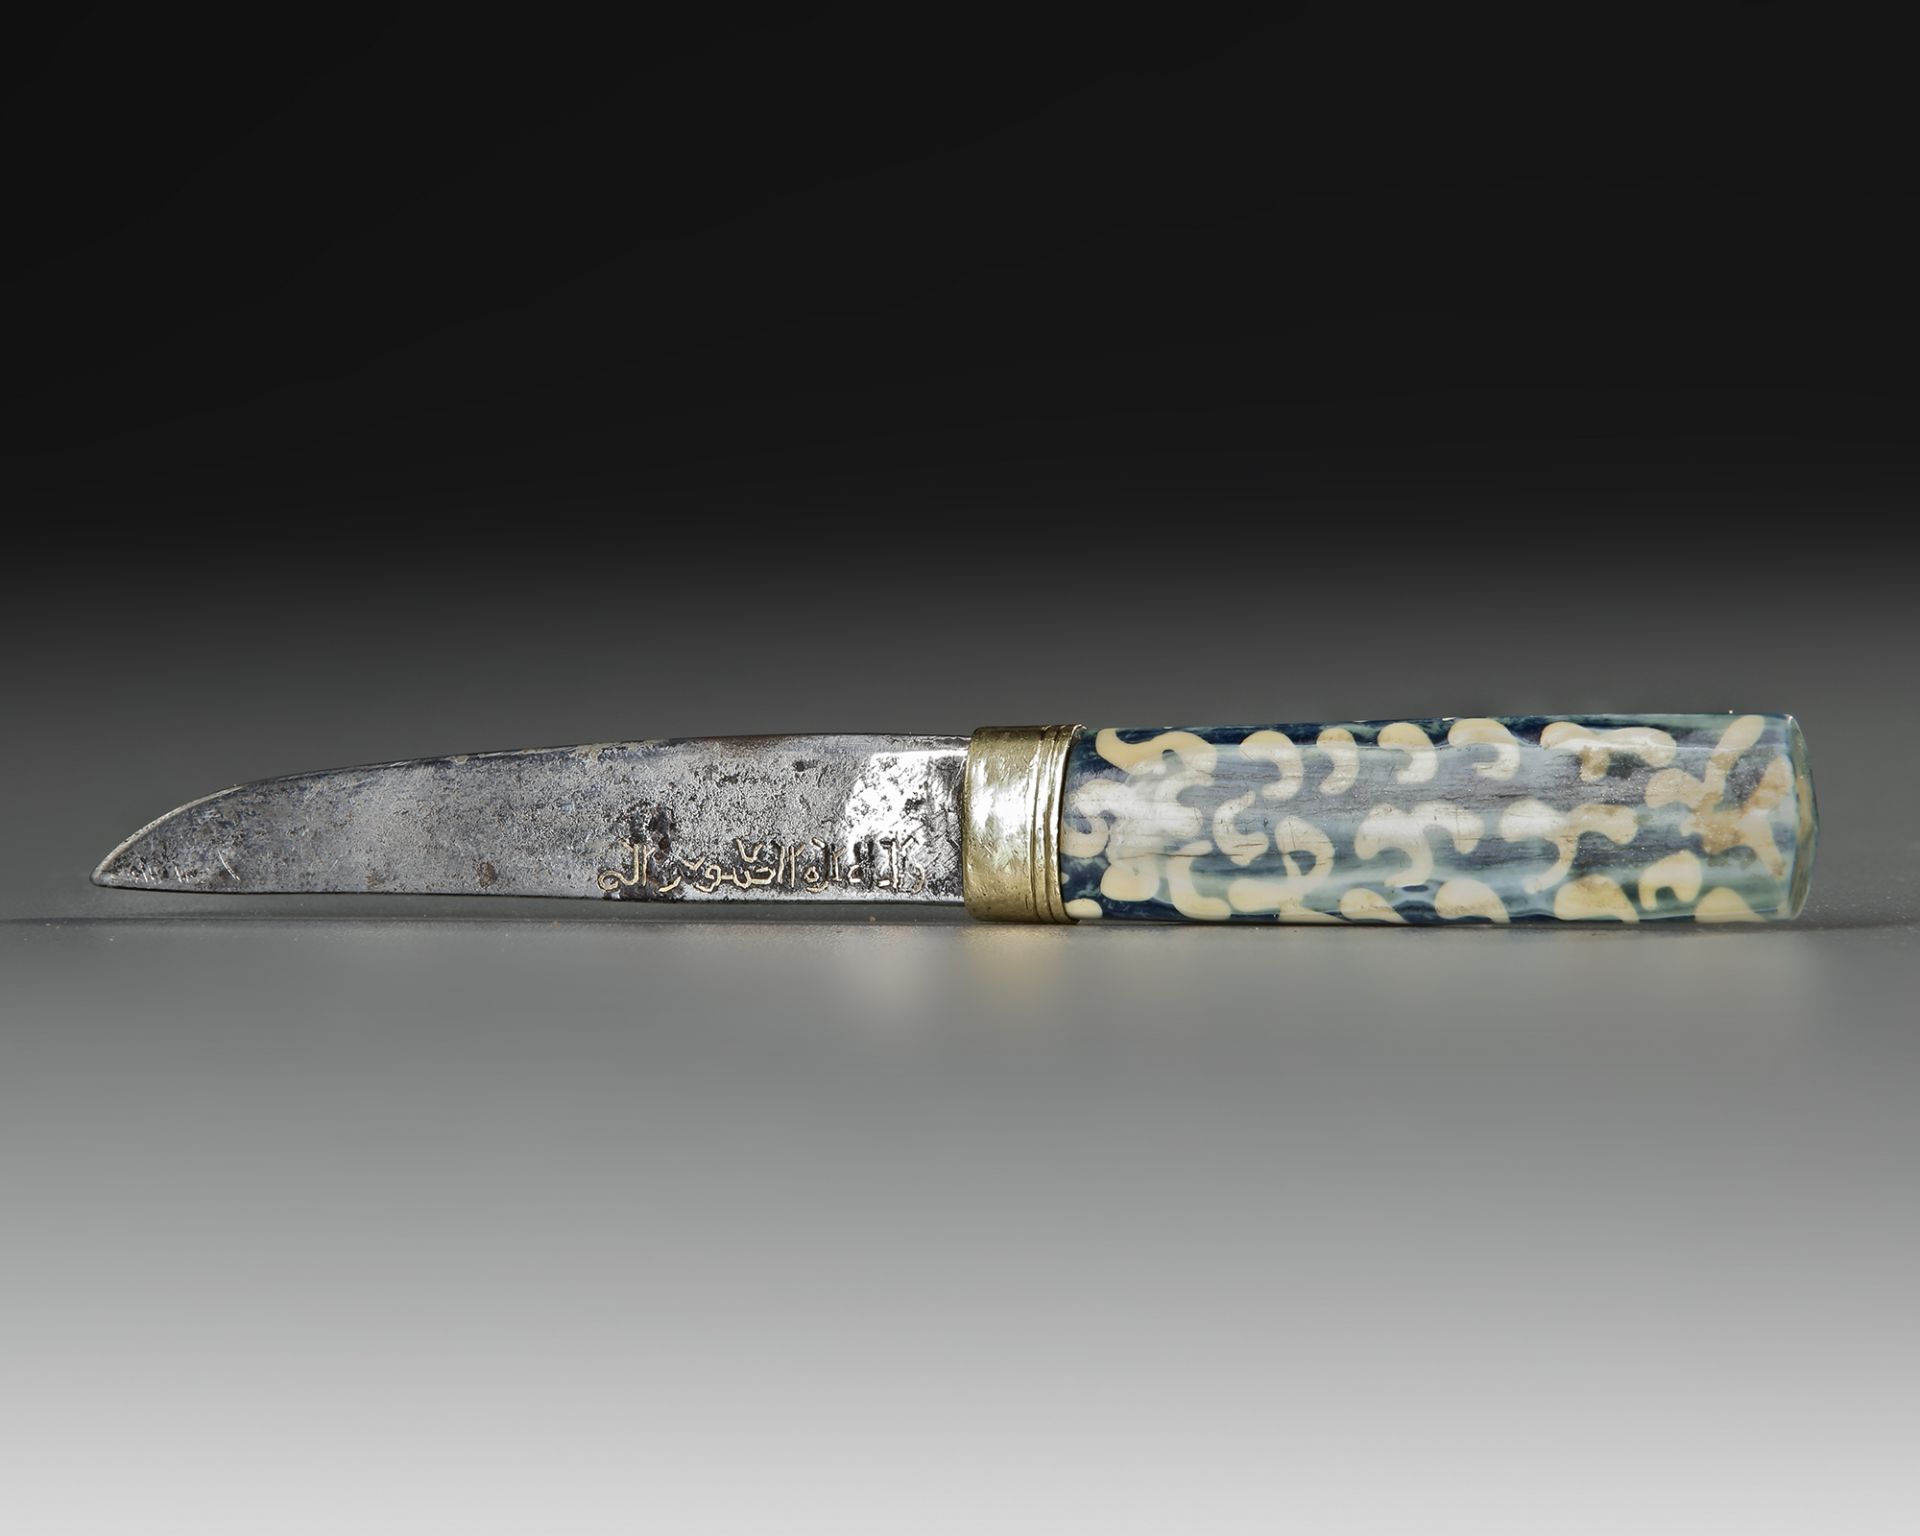 A SMALL INSCRIBED KNIFE, LATE TIMURID, 15TH-16TH CENTURY - Image 5 of 12